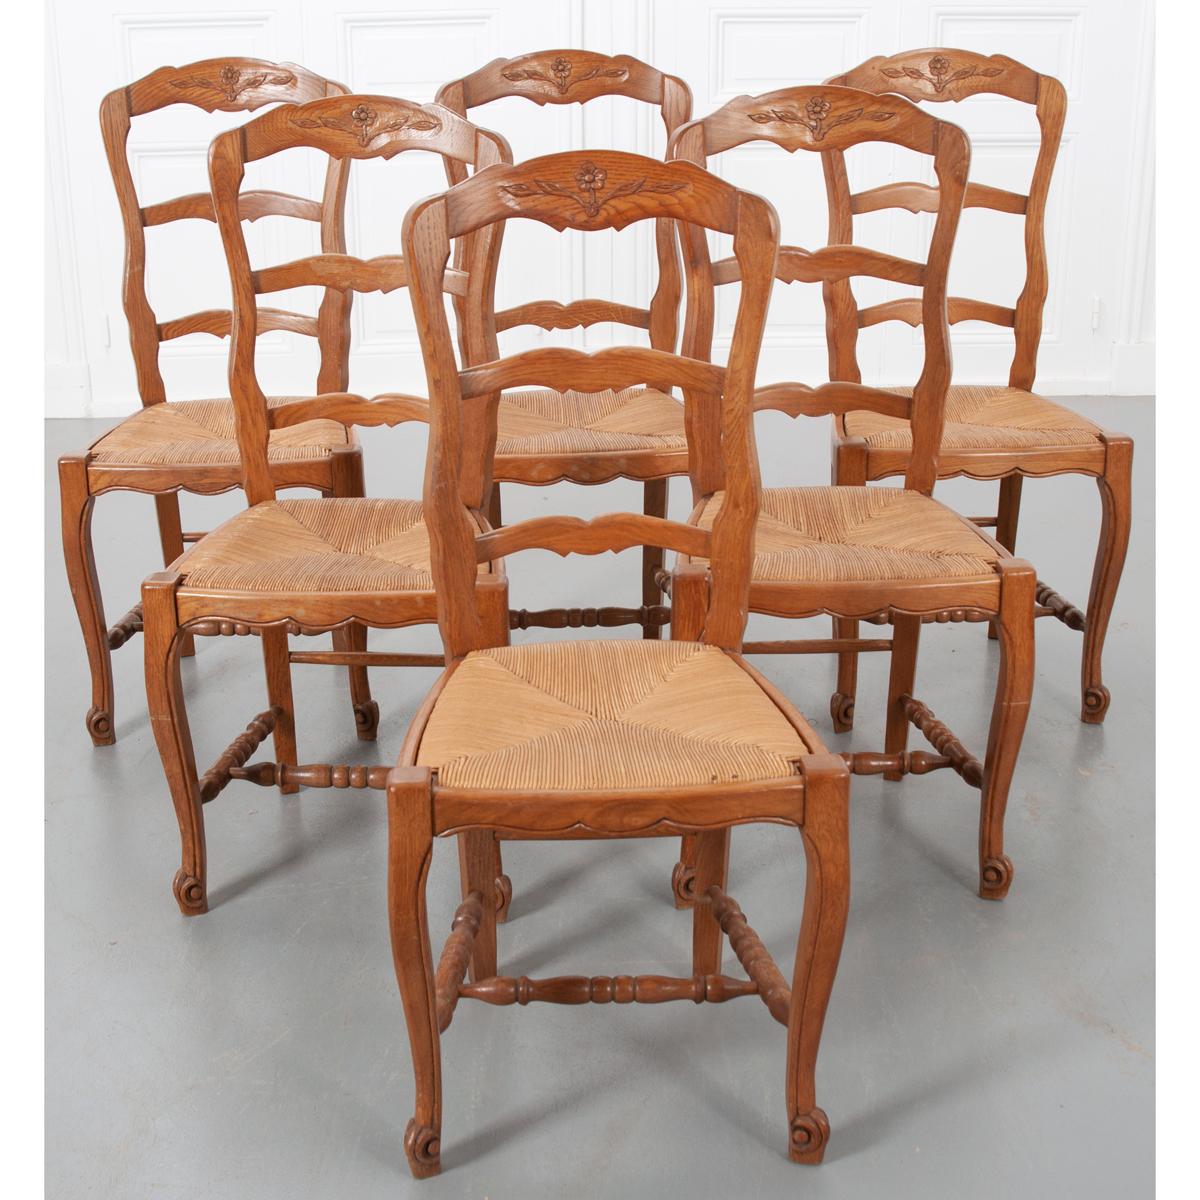 This lovely set of six, vintage, Louis XV-style fruitwood dining chairs, circa 1940s, is from France and feature floral-carved ladder backs, rush seats, cabriole legs with turned stretchers and escargot feet. The rush seats are removable.